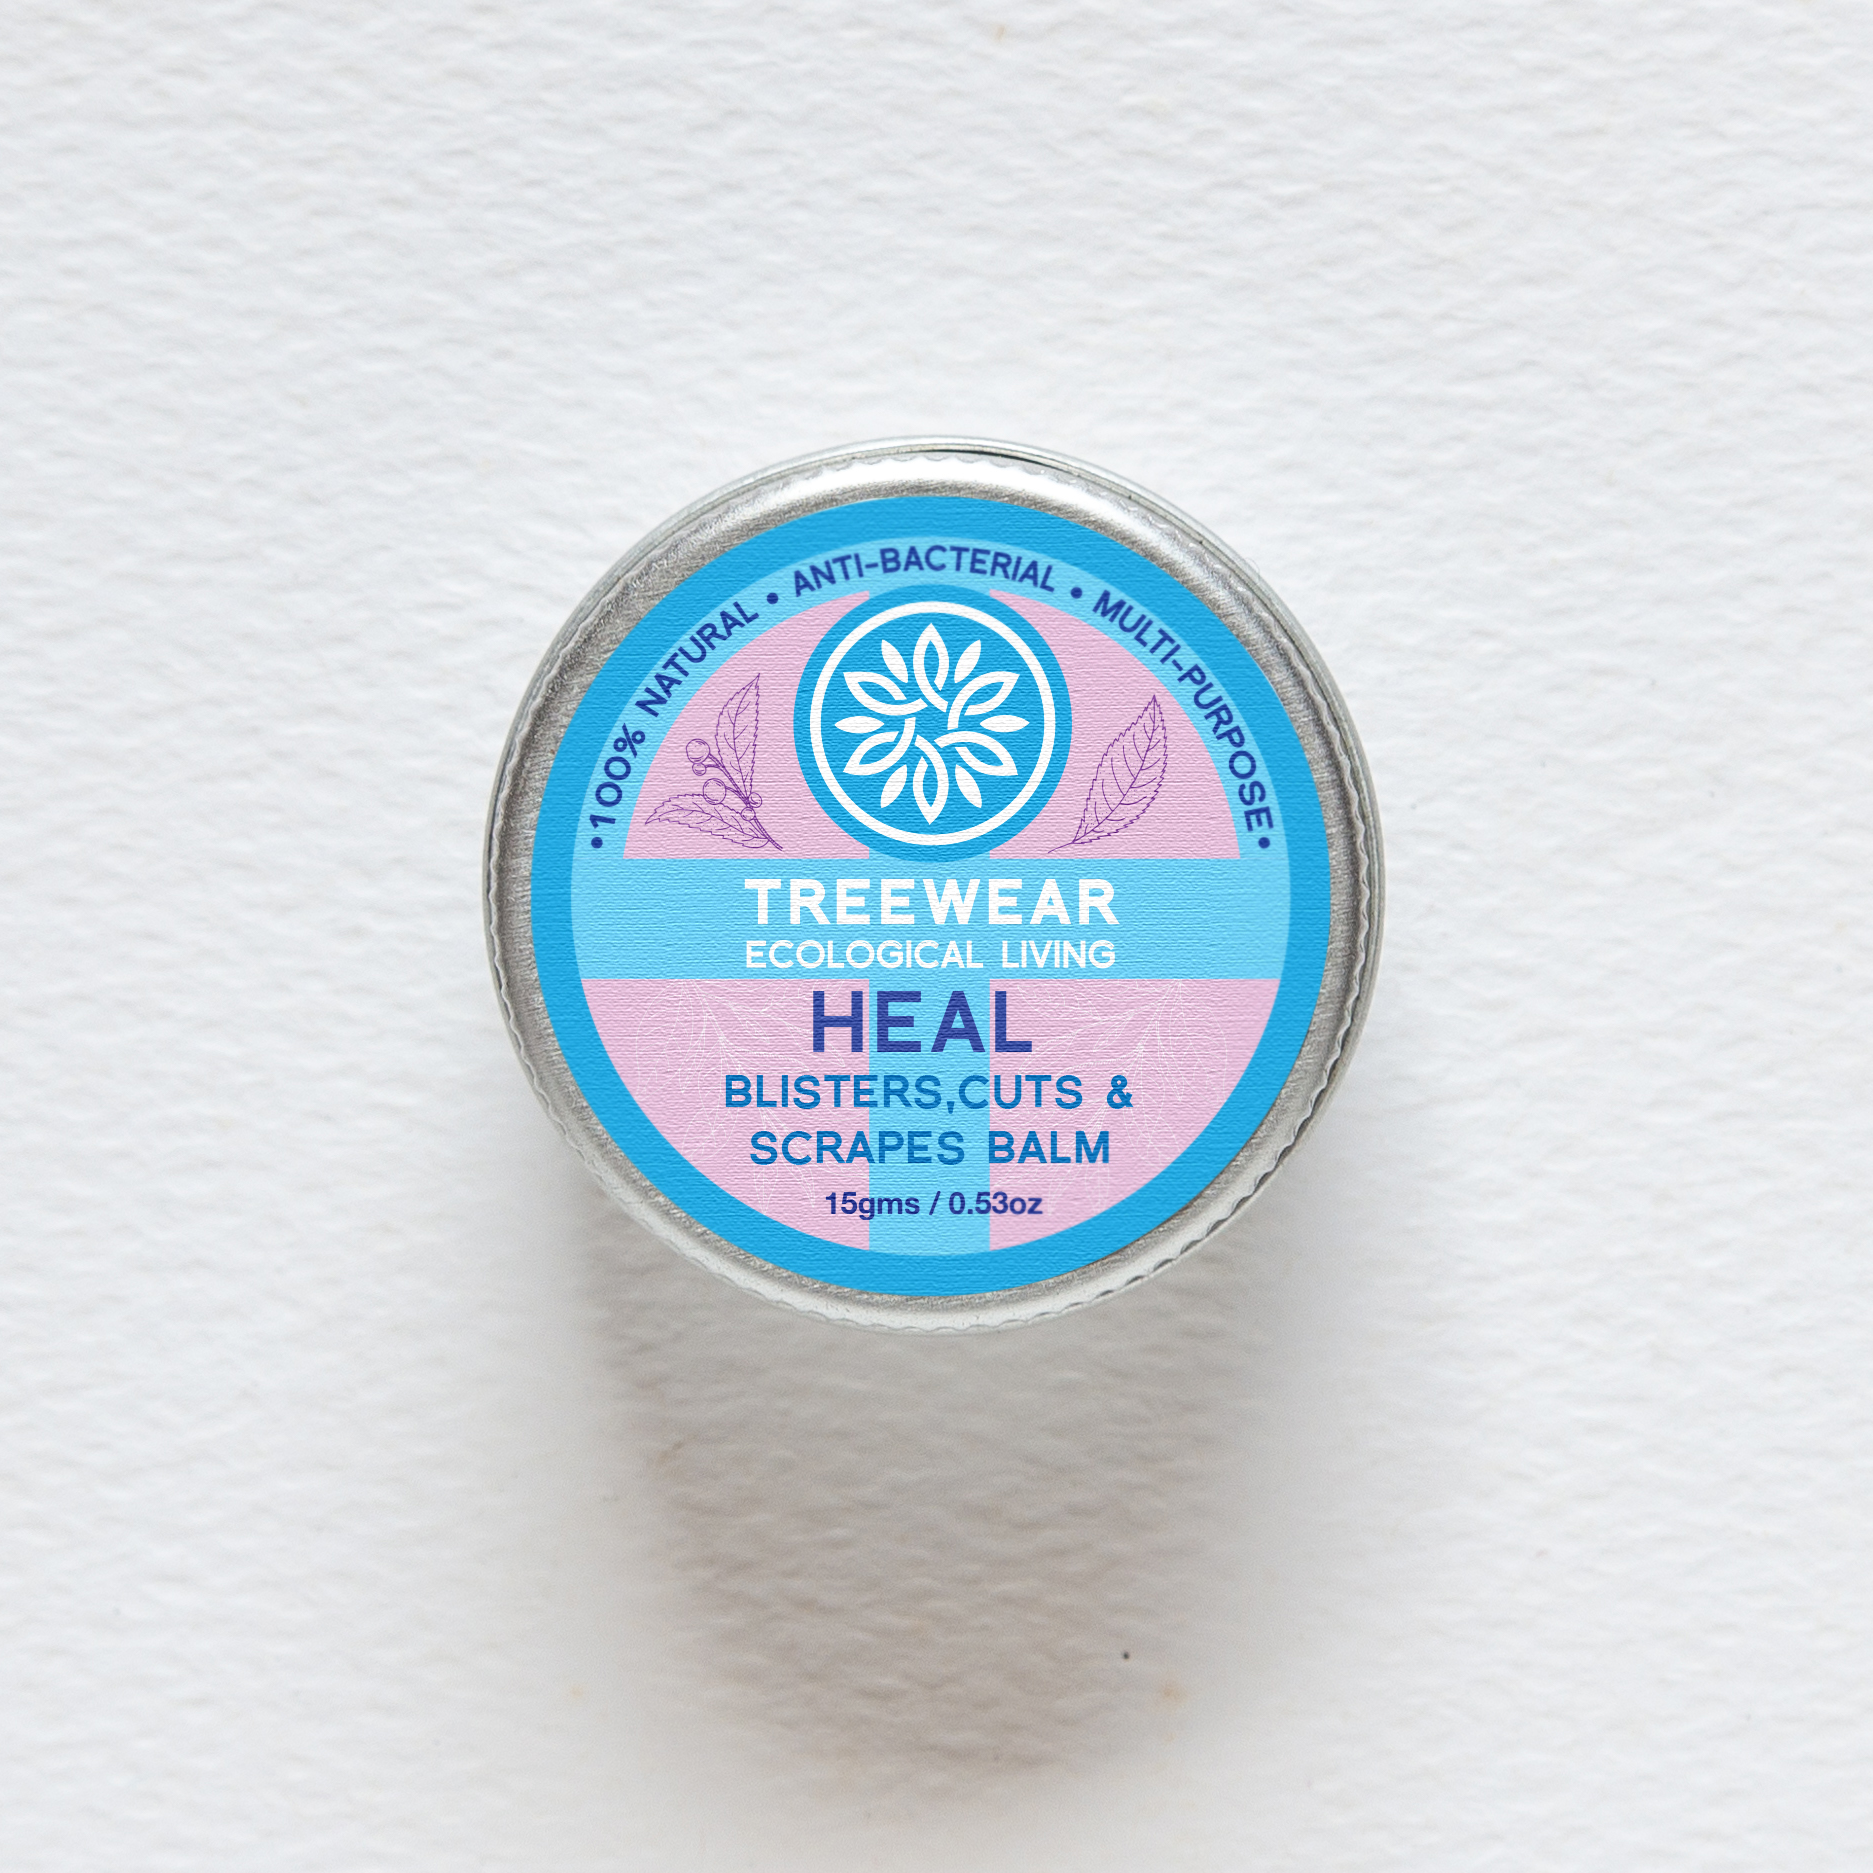 HEAL - Anti-Septic Balm for Cuts, Scrapes & Blisters (13 grams)